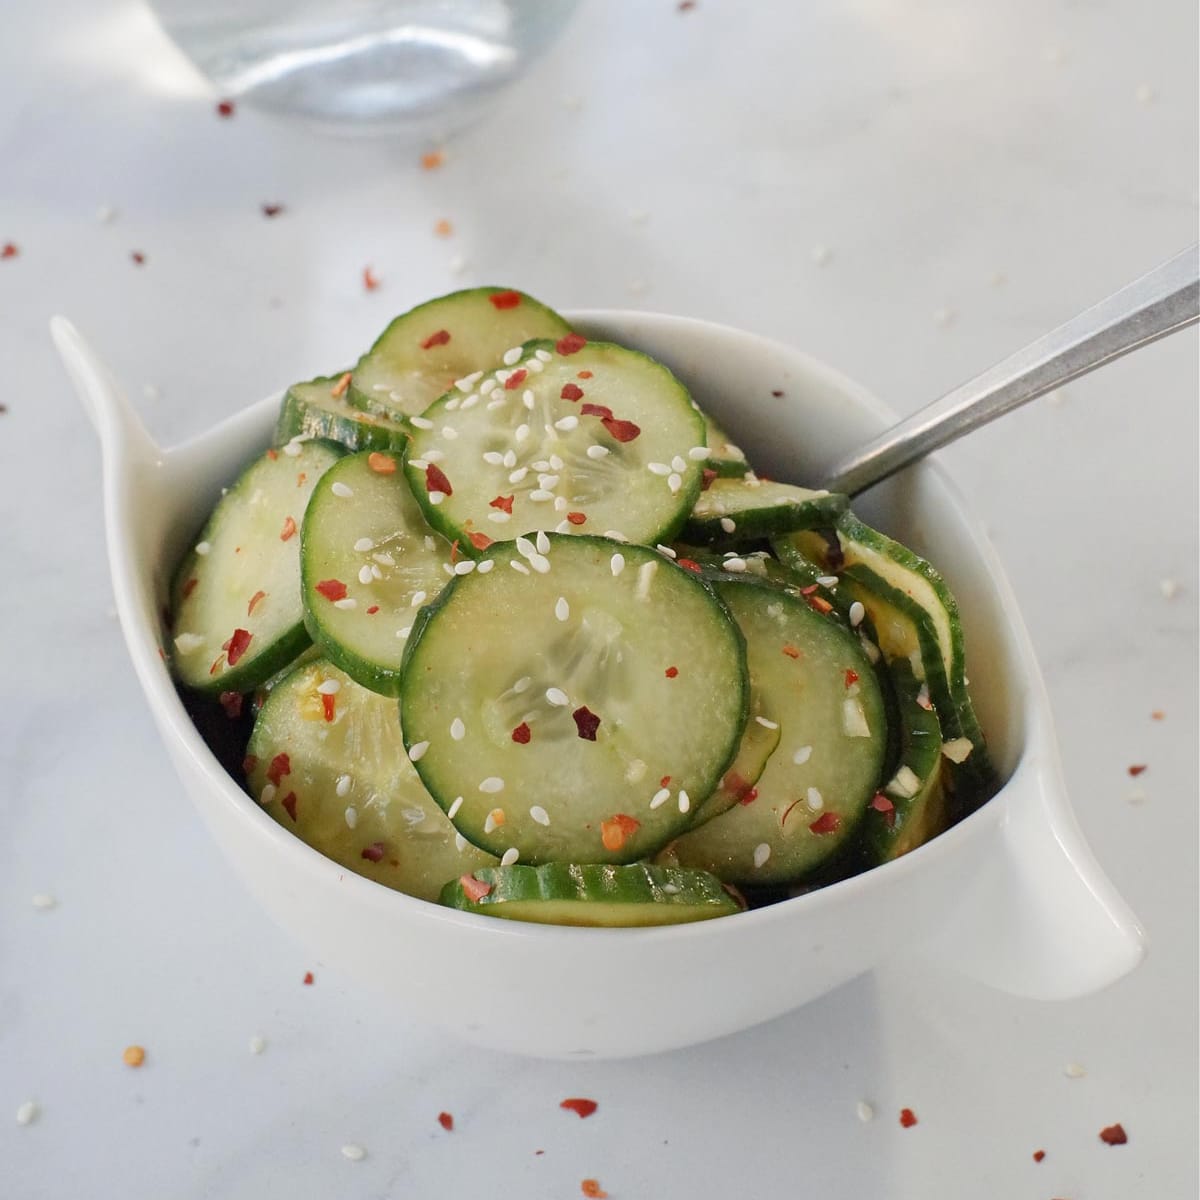 Korean pickles cucumbers in white bowl on grey marble counter surface with glass vinegar container in background